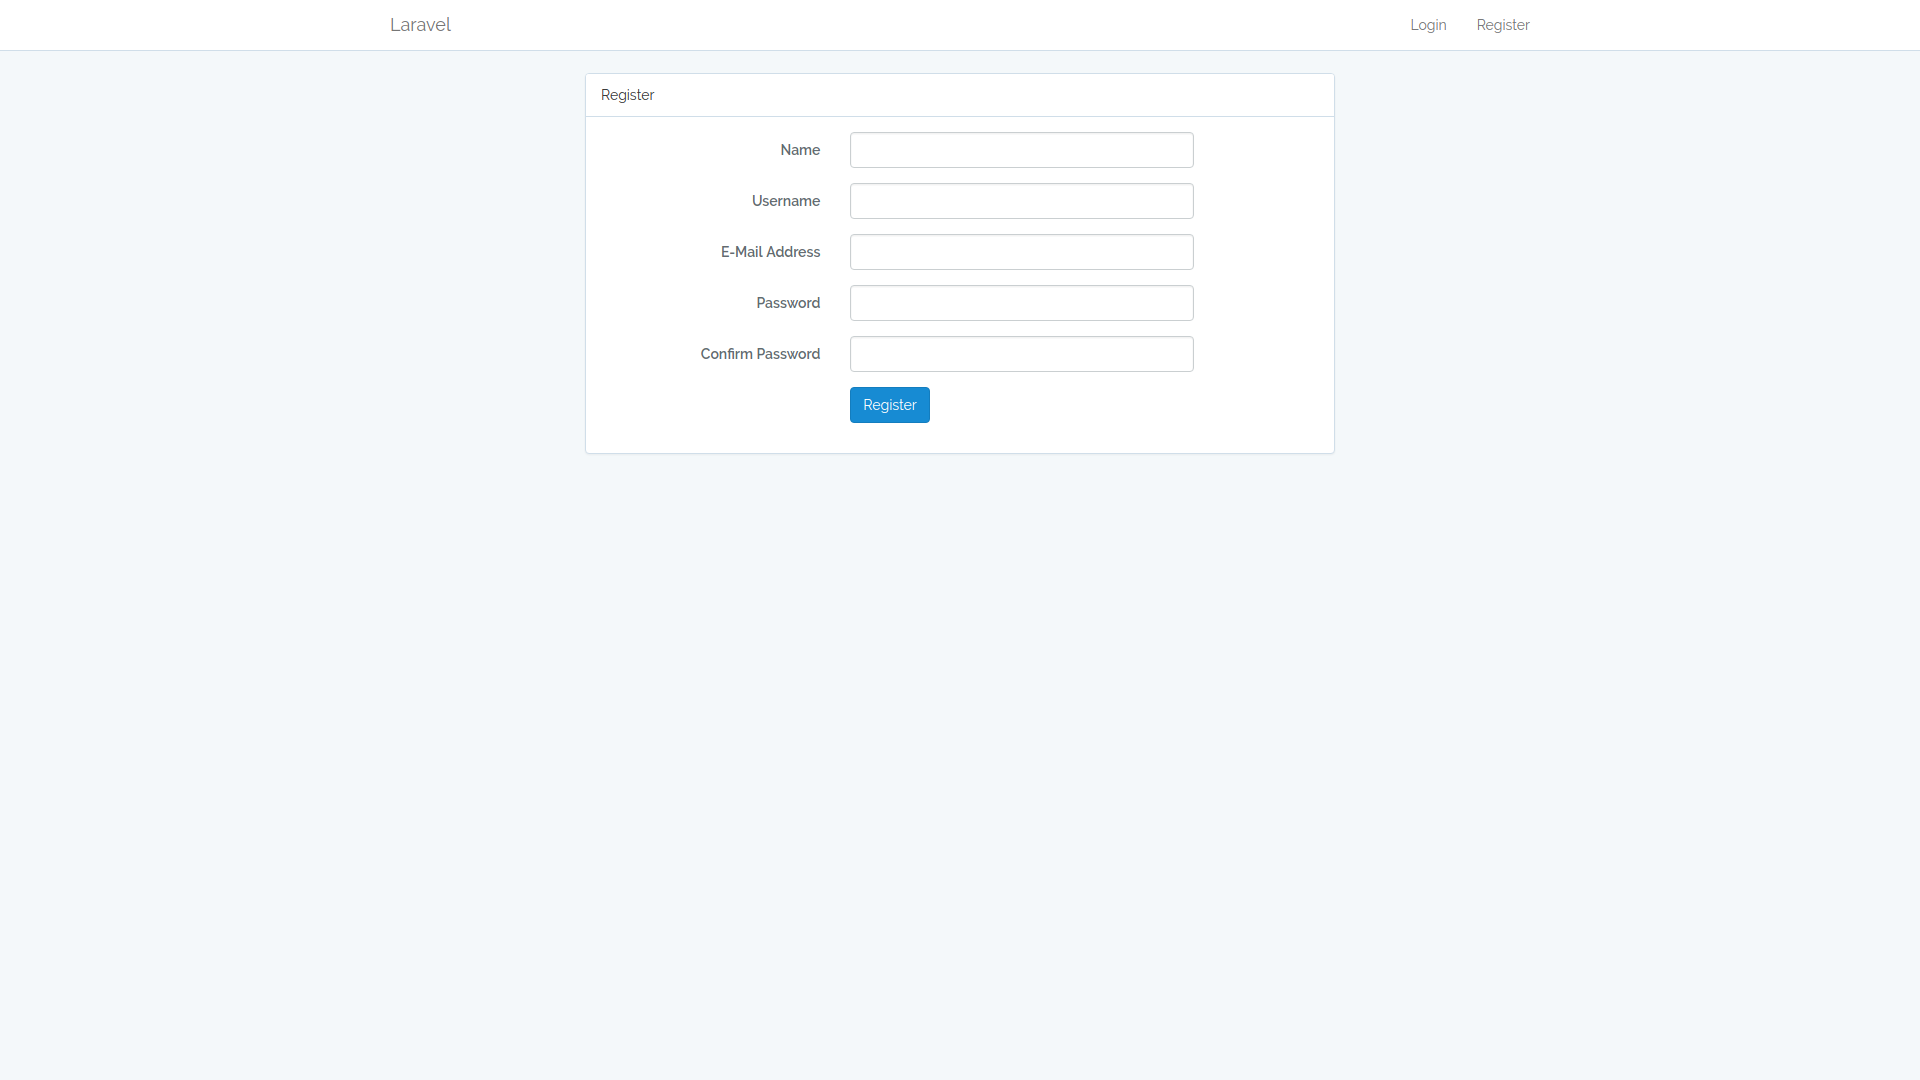 A guide to customize Laravel 5.5 Login, Register.